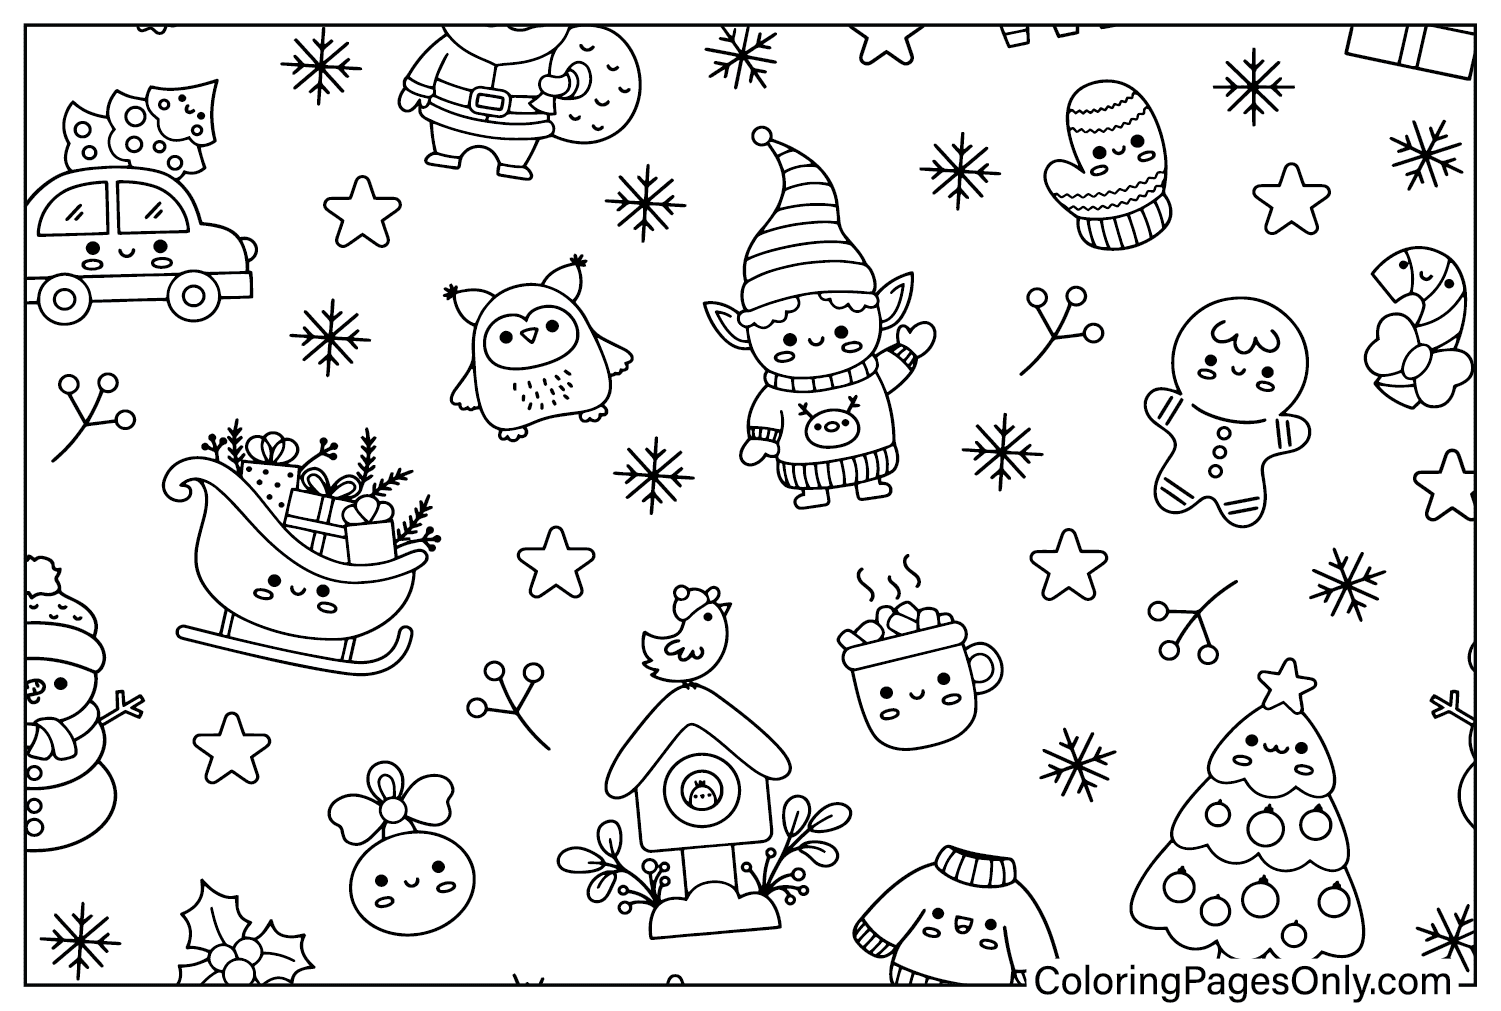 Christmas Pattern Coloring Page from Christmas Wallpaper